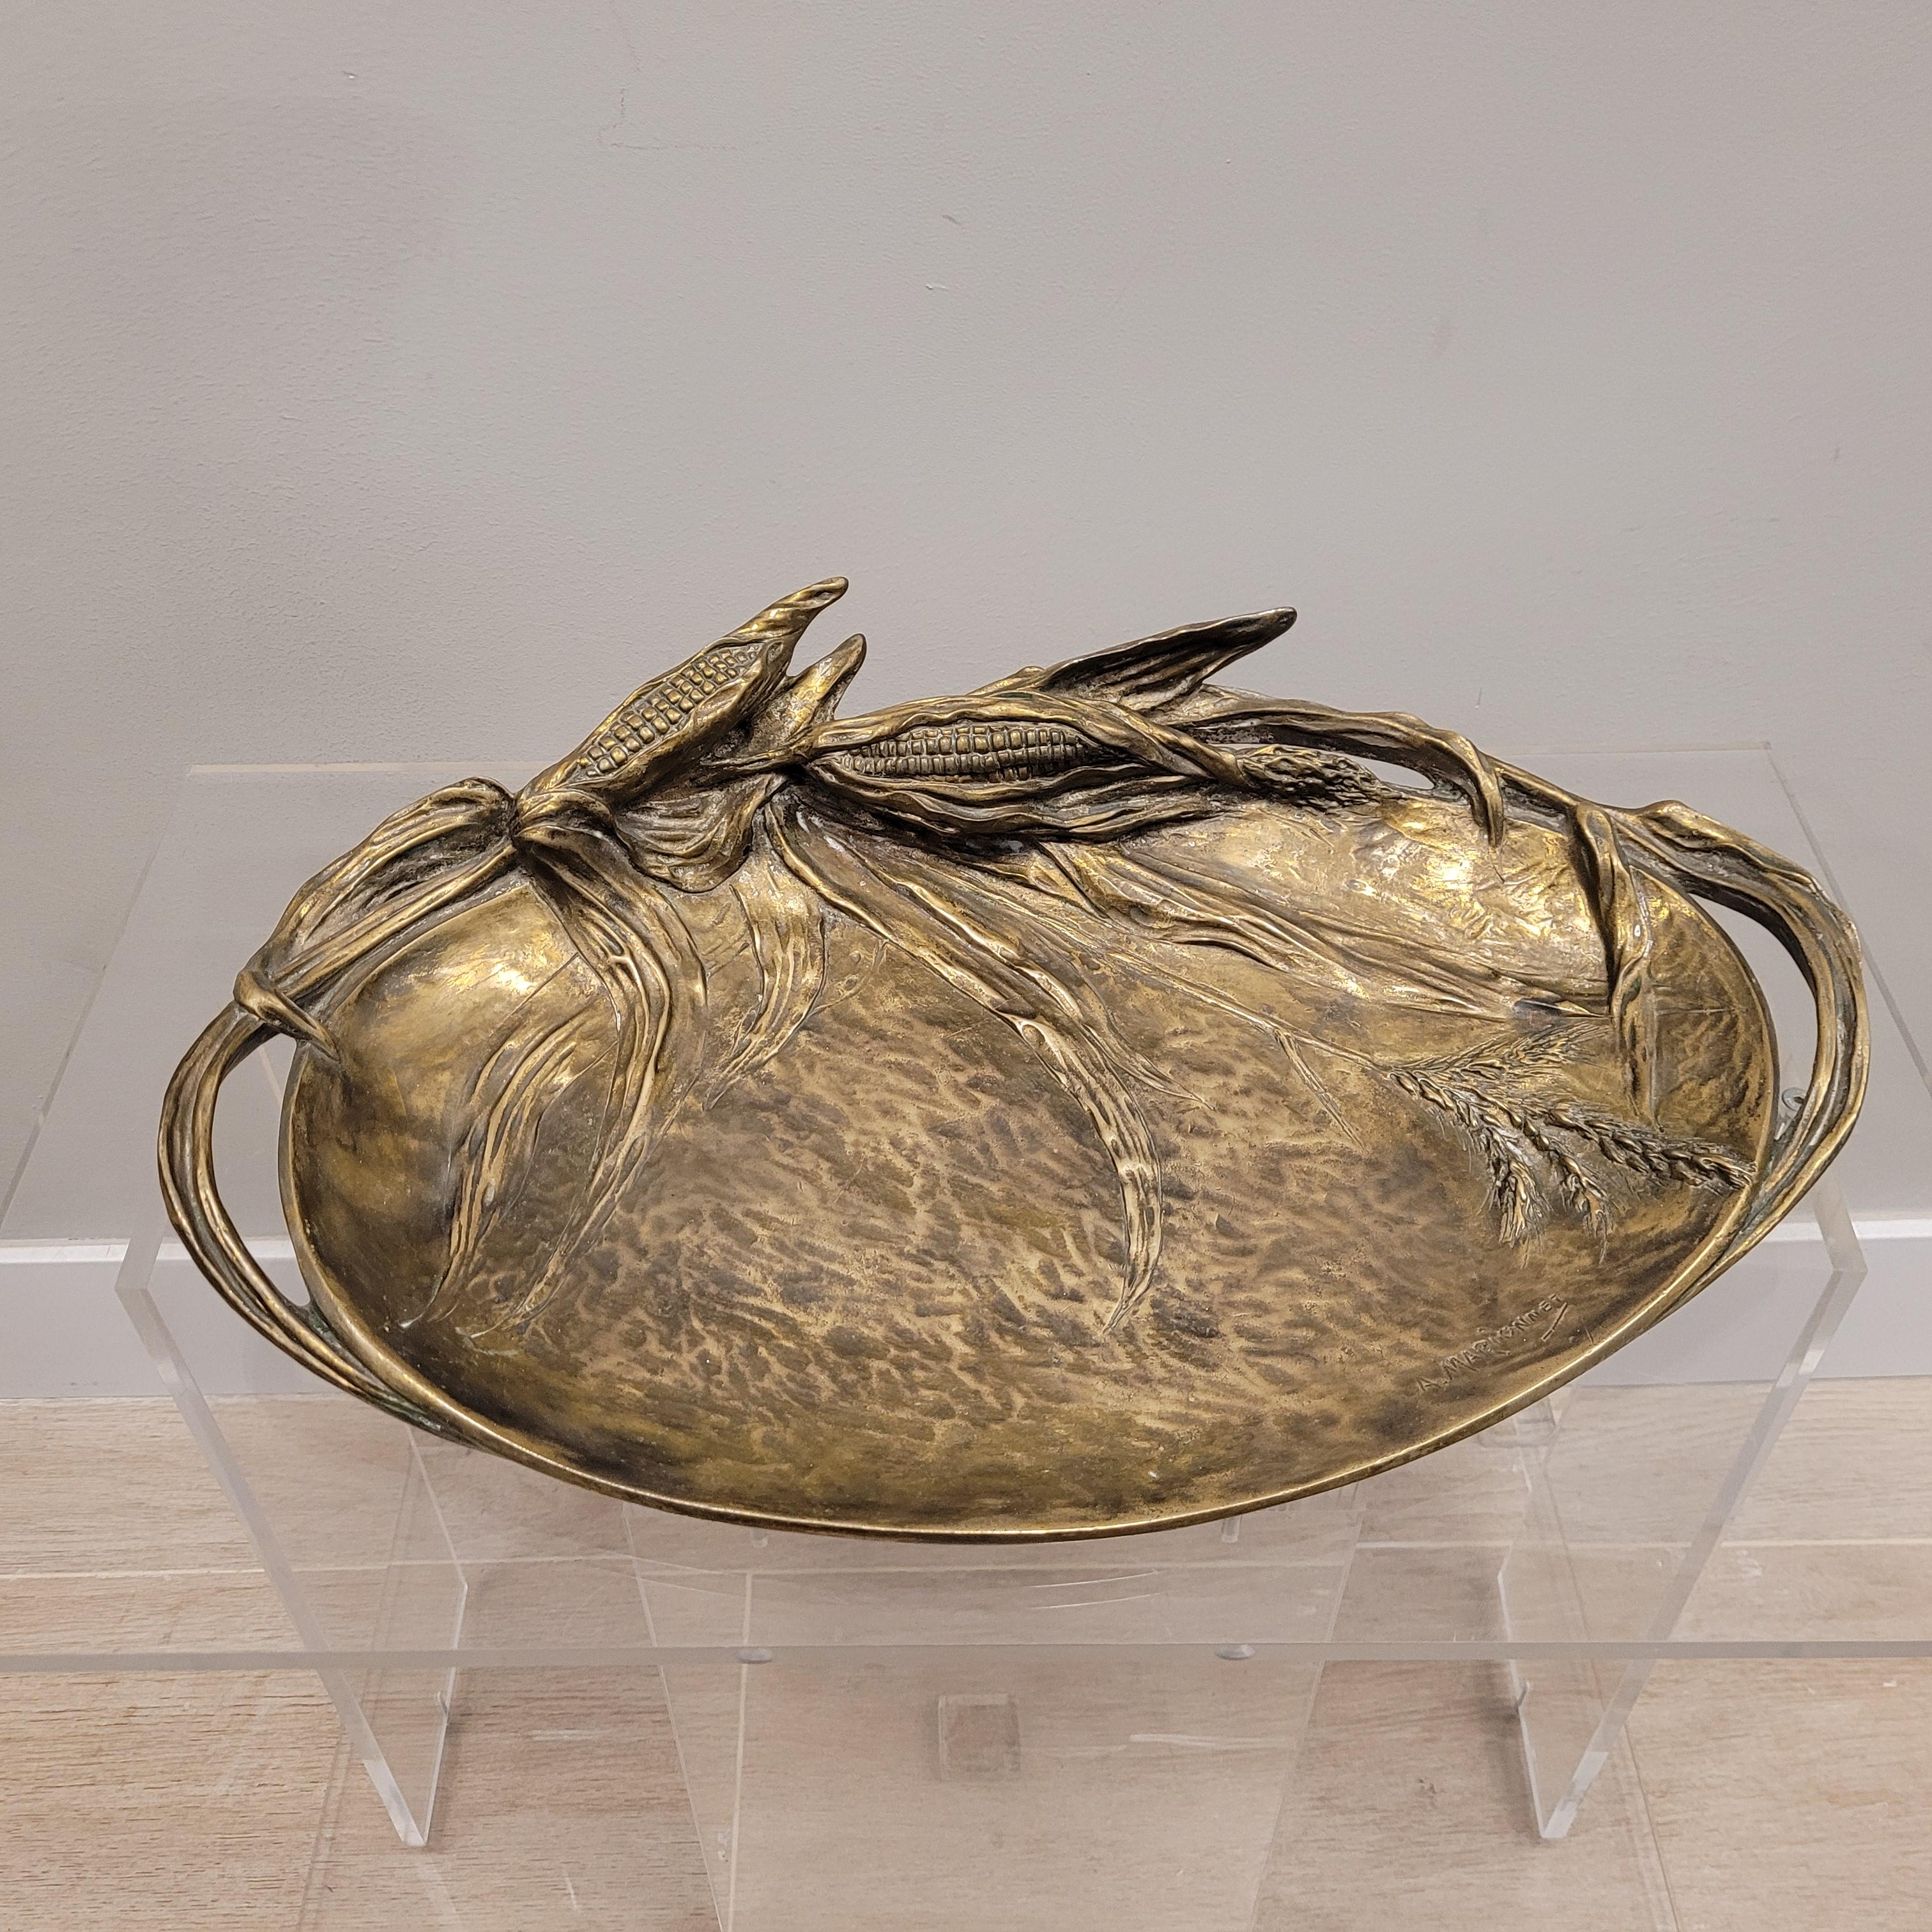 One of a kind  fruit bowl or centerpiece by Albert Marionnet .
 Oval profile in embossed bronze, with a beautiful golden patina, decorated in half relief with corn cobs, leaves and the corn flower, with a hammered bottom.

It is the creation of